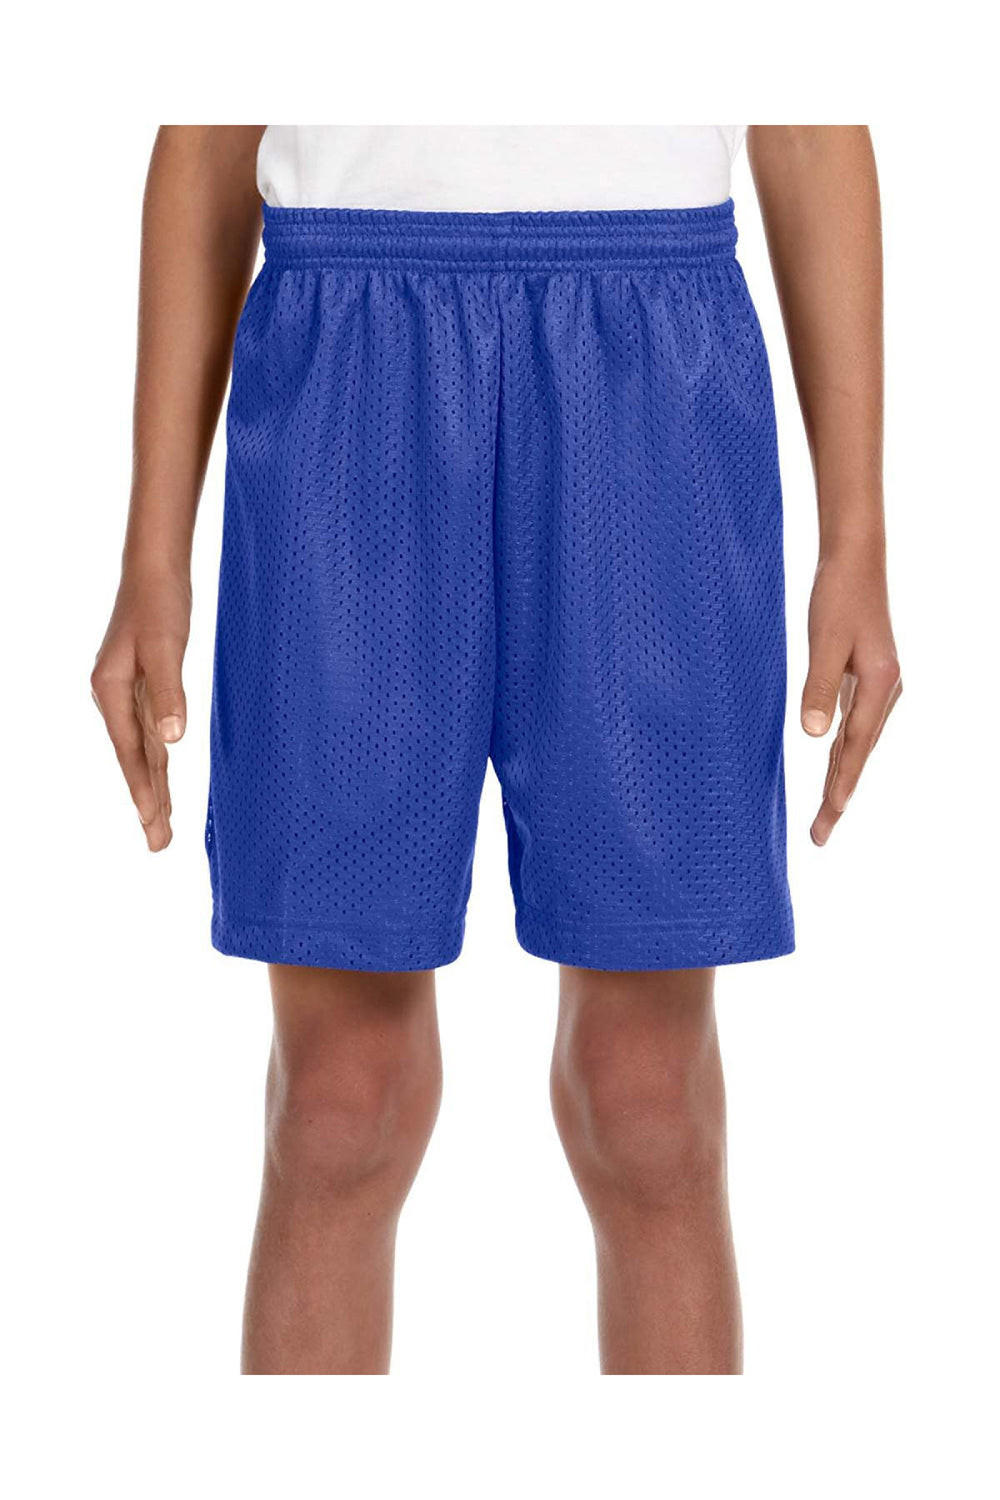 A4 NB5301 Youth Moisture Wicking Mesh Shorts Royal Blue Model Front